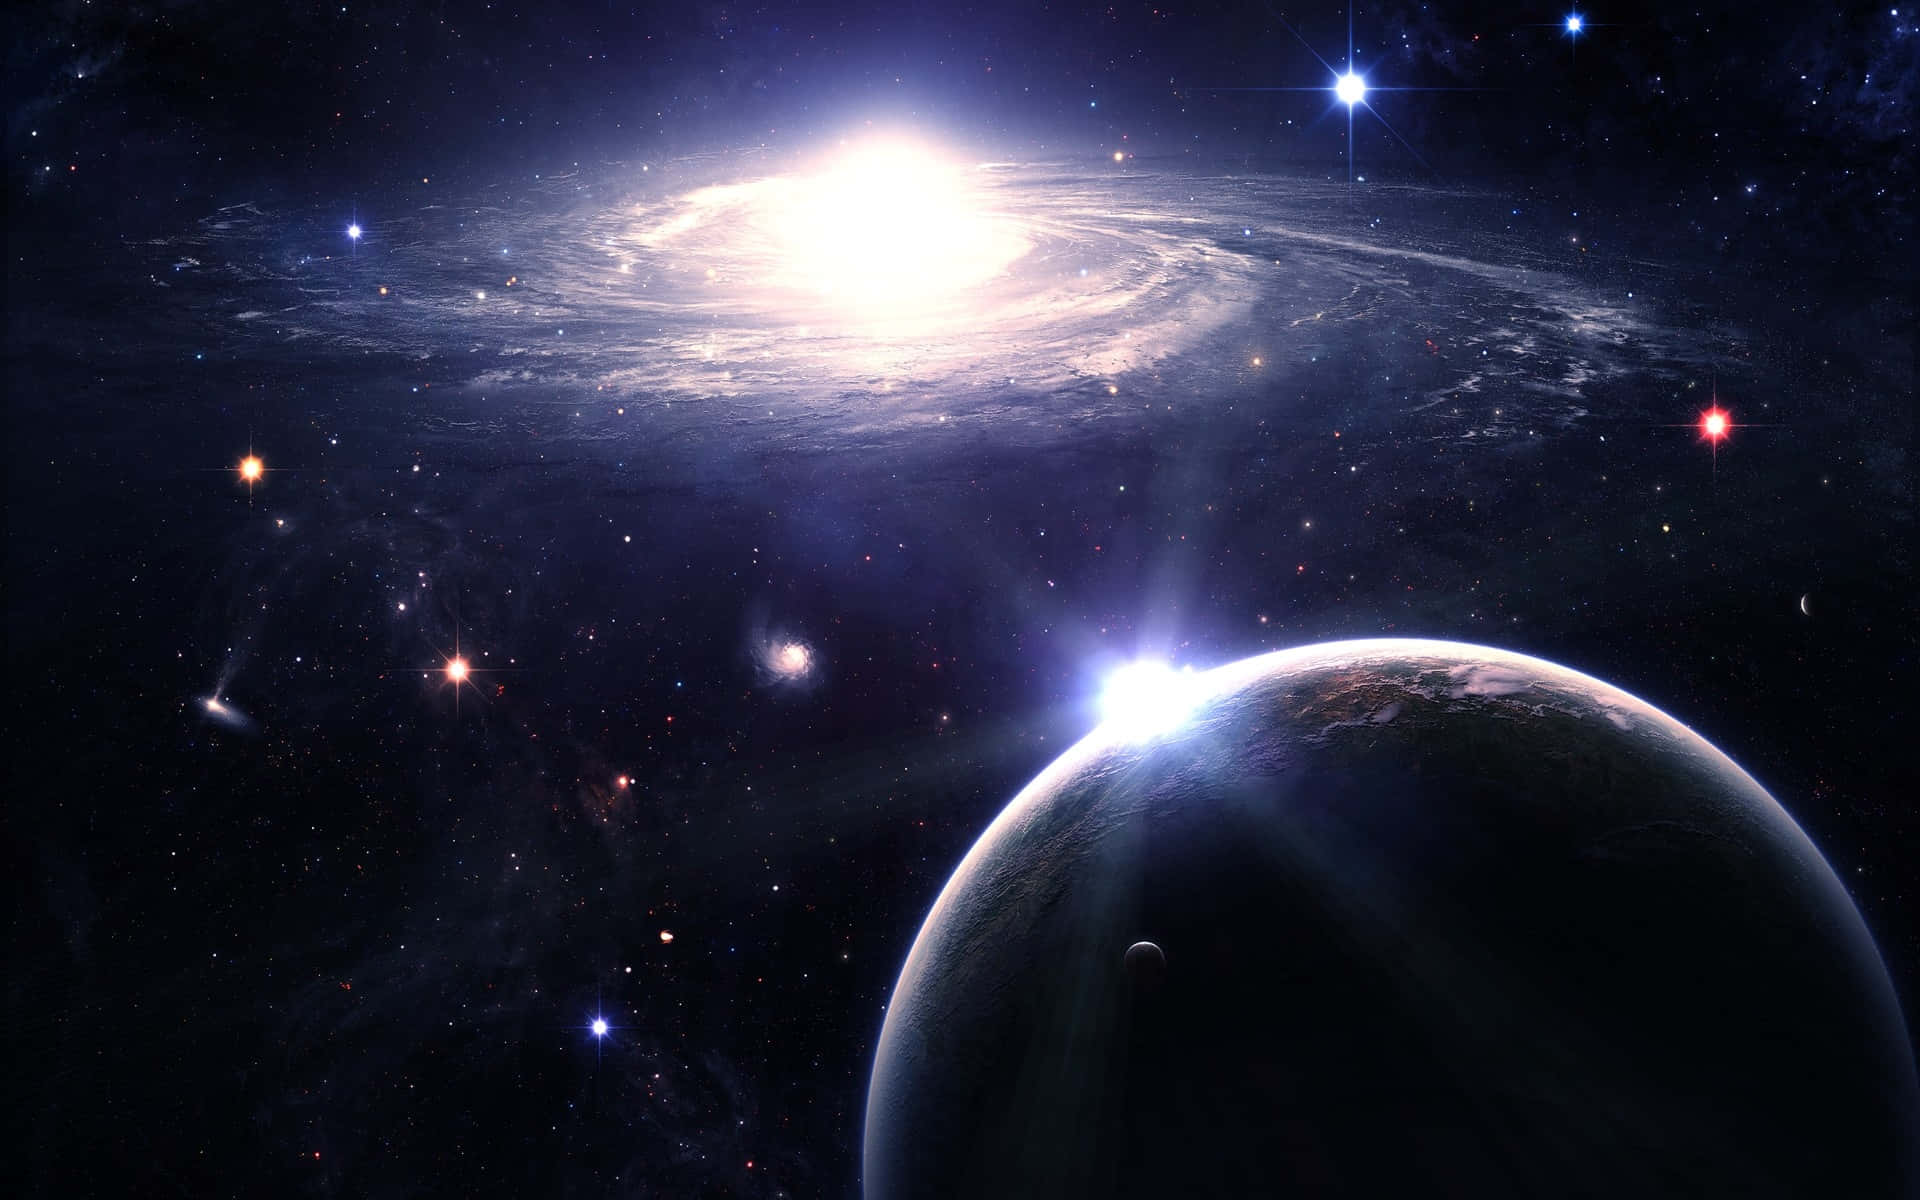 A mesmerizing journey through outer space